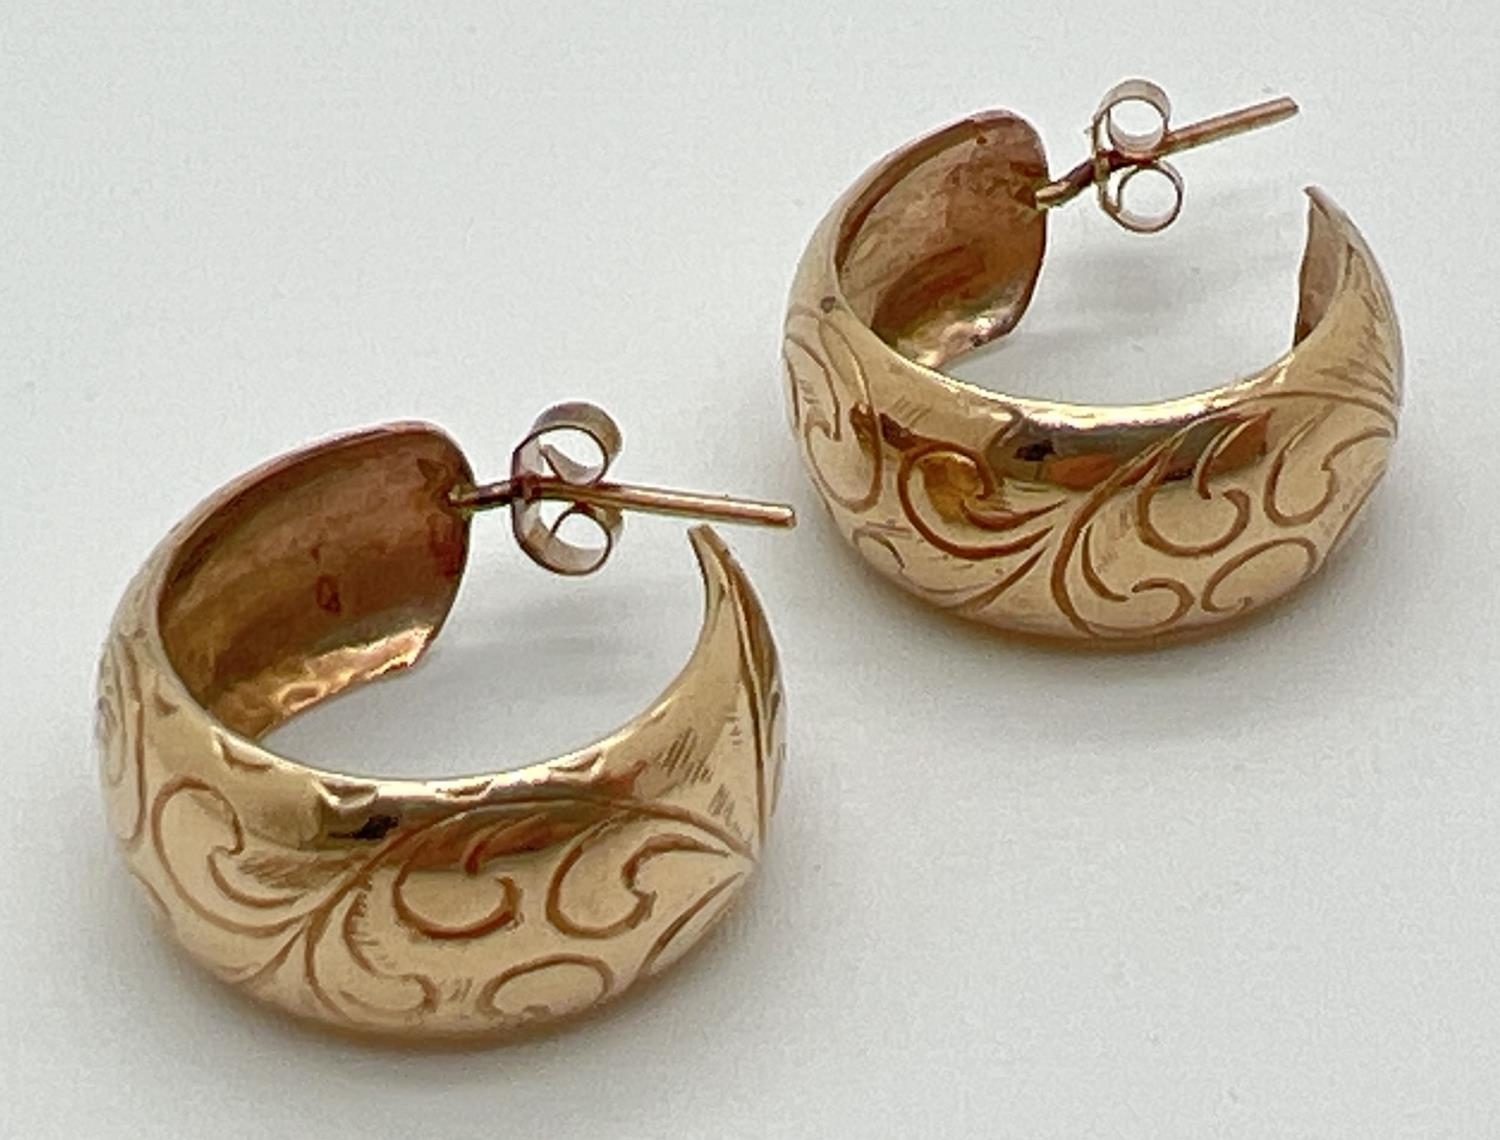 A pair of vintage 9ct gold half hoop earrings with engraved floral decoration. Complete with